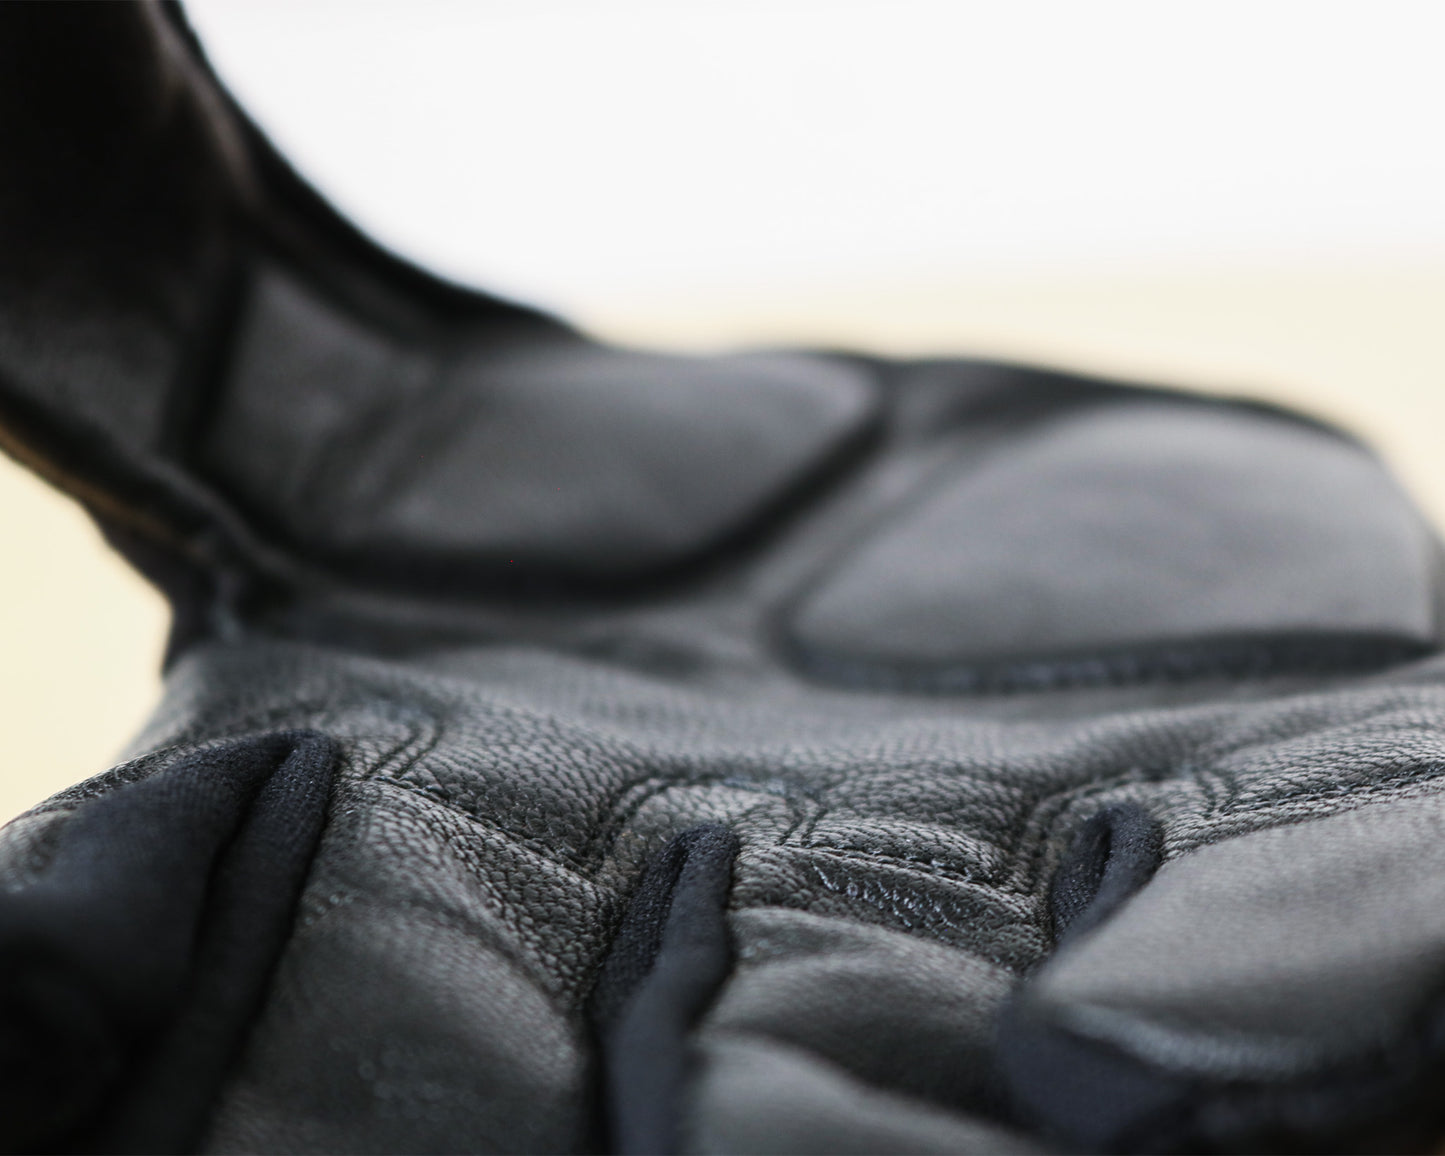 Padded, breathable mountain biking gloves made with goat leather and knitted yarn. Close up of palm material